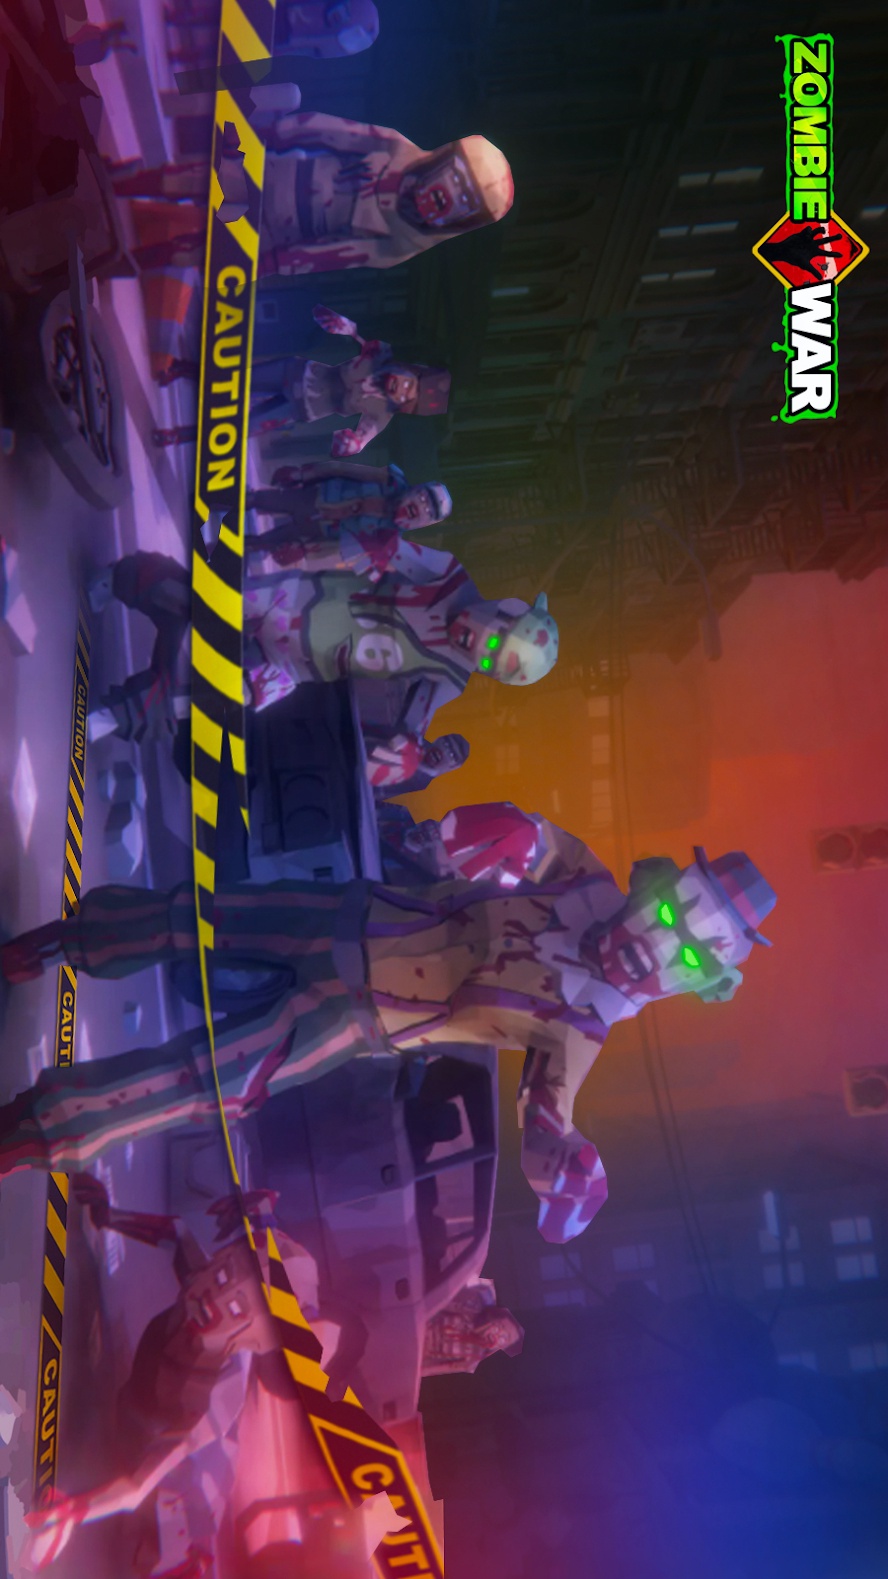 Zombie War: Rules of Survival(Large gold coins)